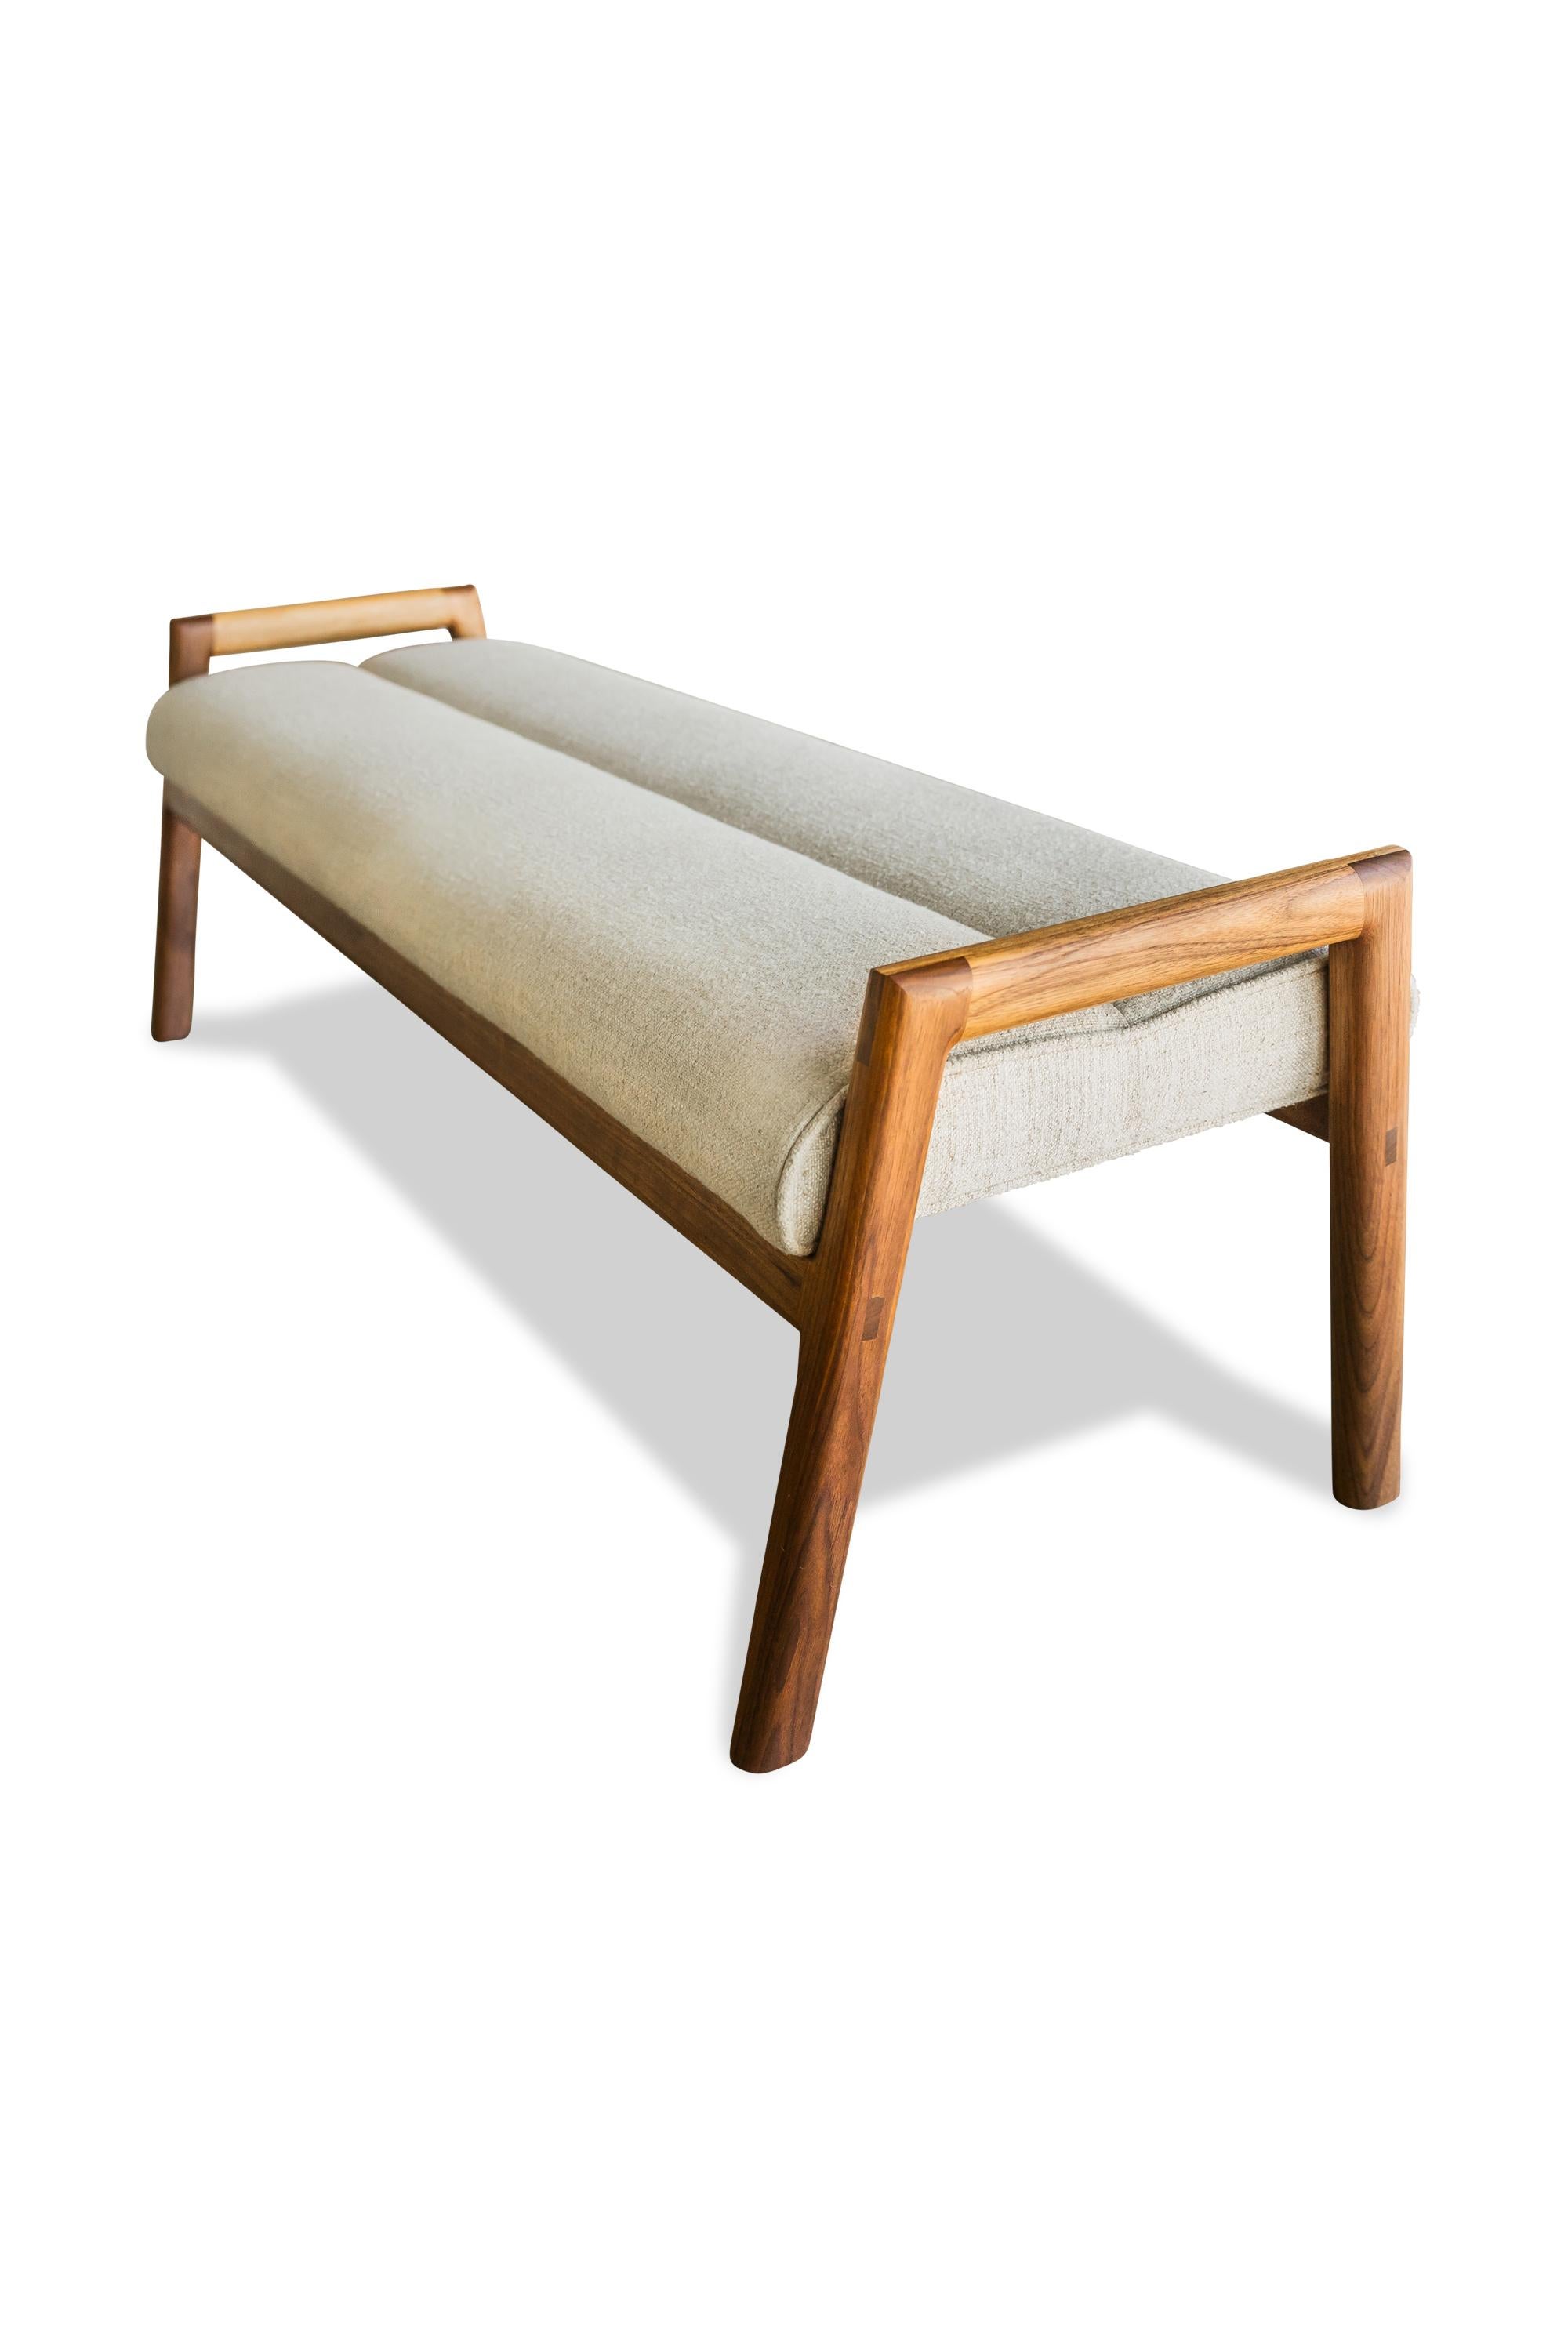 White Oak framed MORESBY Bench with custom upholstered seat In New Condition For Sale In North Hollywood, CA